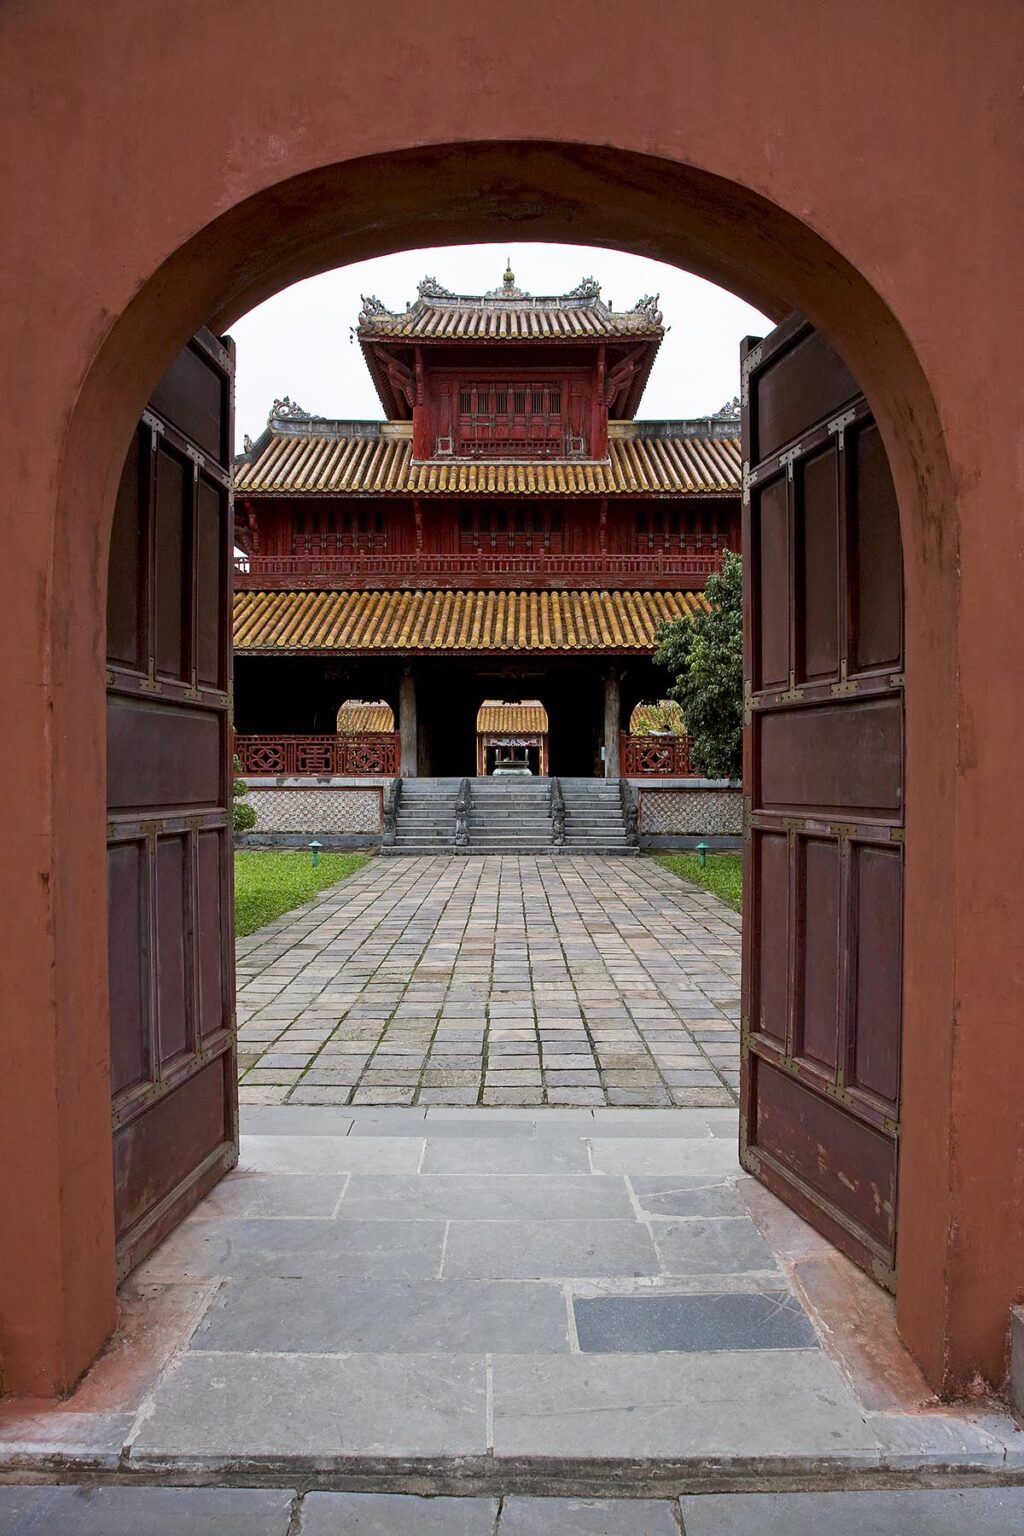 Large ARCHED DOORWAYS lead the way to the MIEU TEMPLE inside the IMPERIAL CITADEL - HUE. VIETNAM